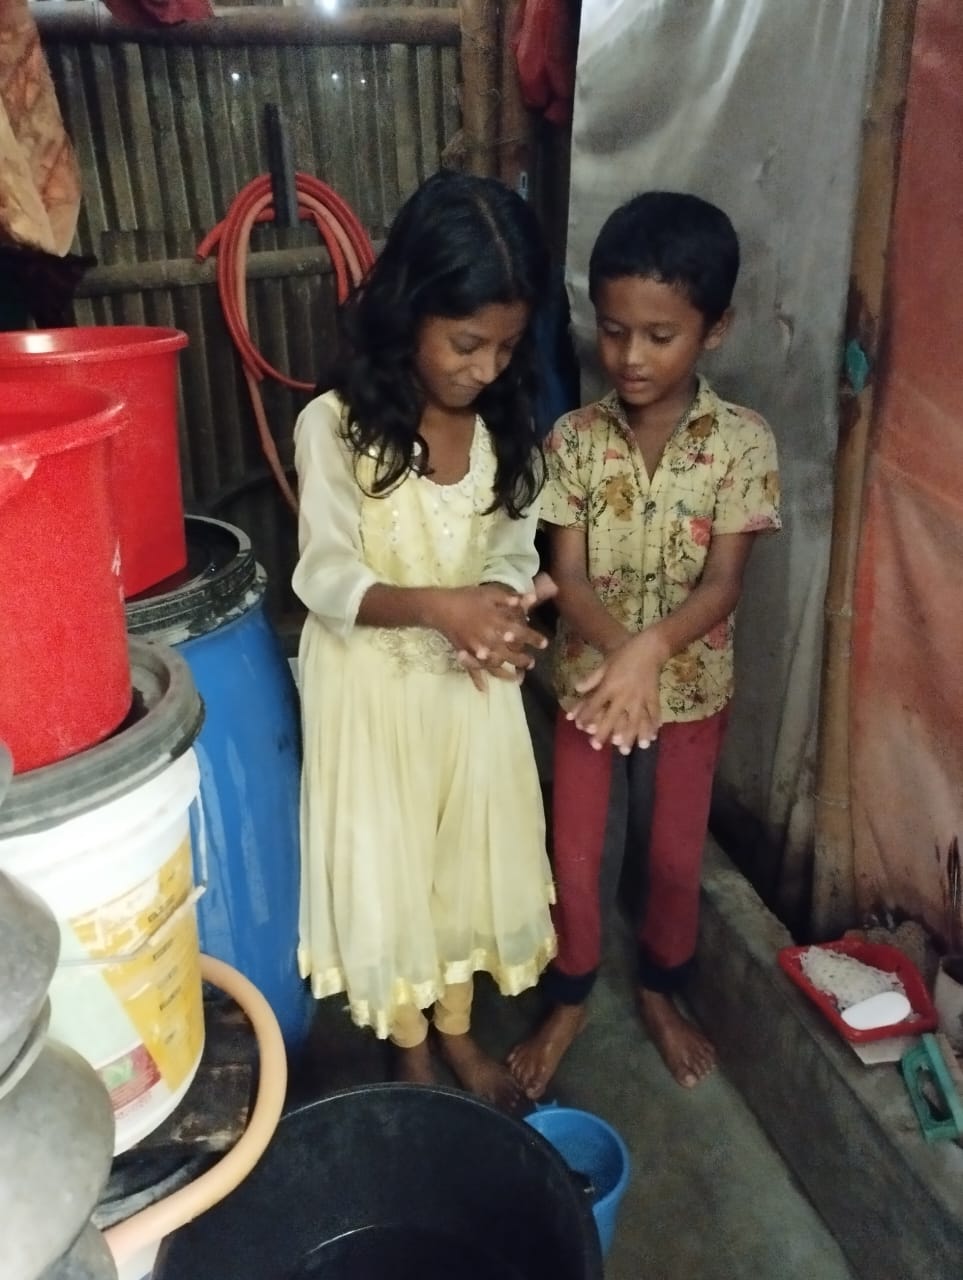 Abdur Rahman teaching other kids how to wash hands properly